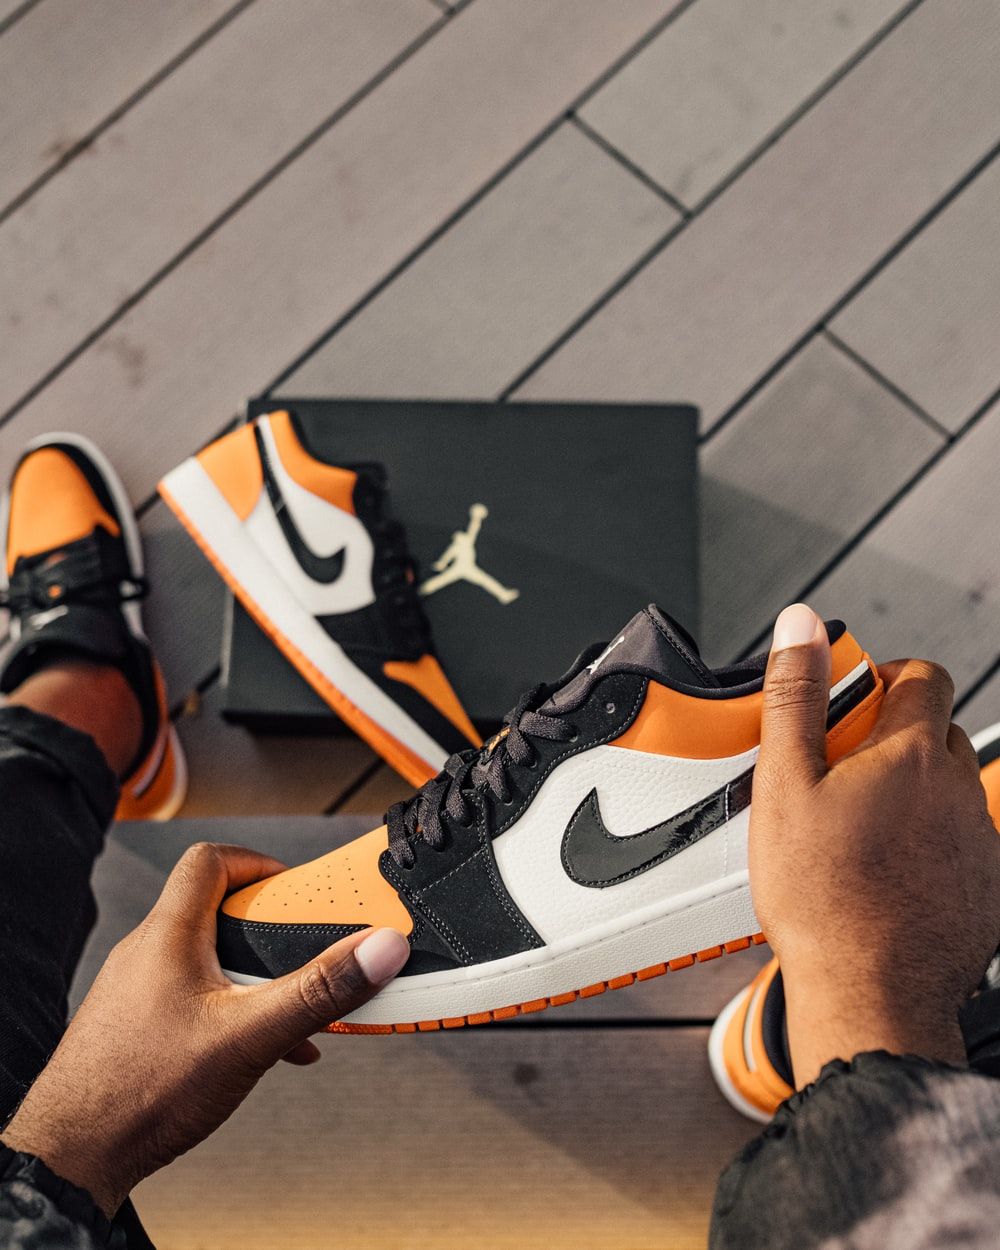 Person Sitting And Holding White, Orange, And Black Air Jordan 1 Low Top Sneaker Photo